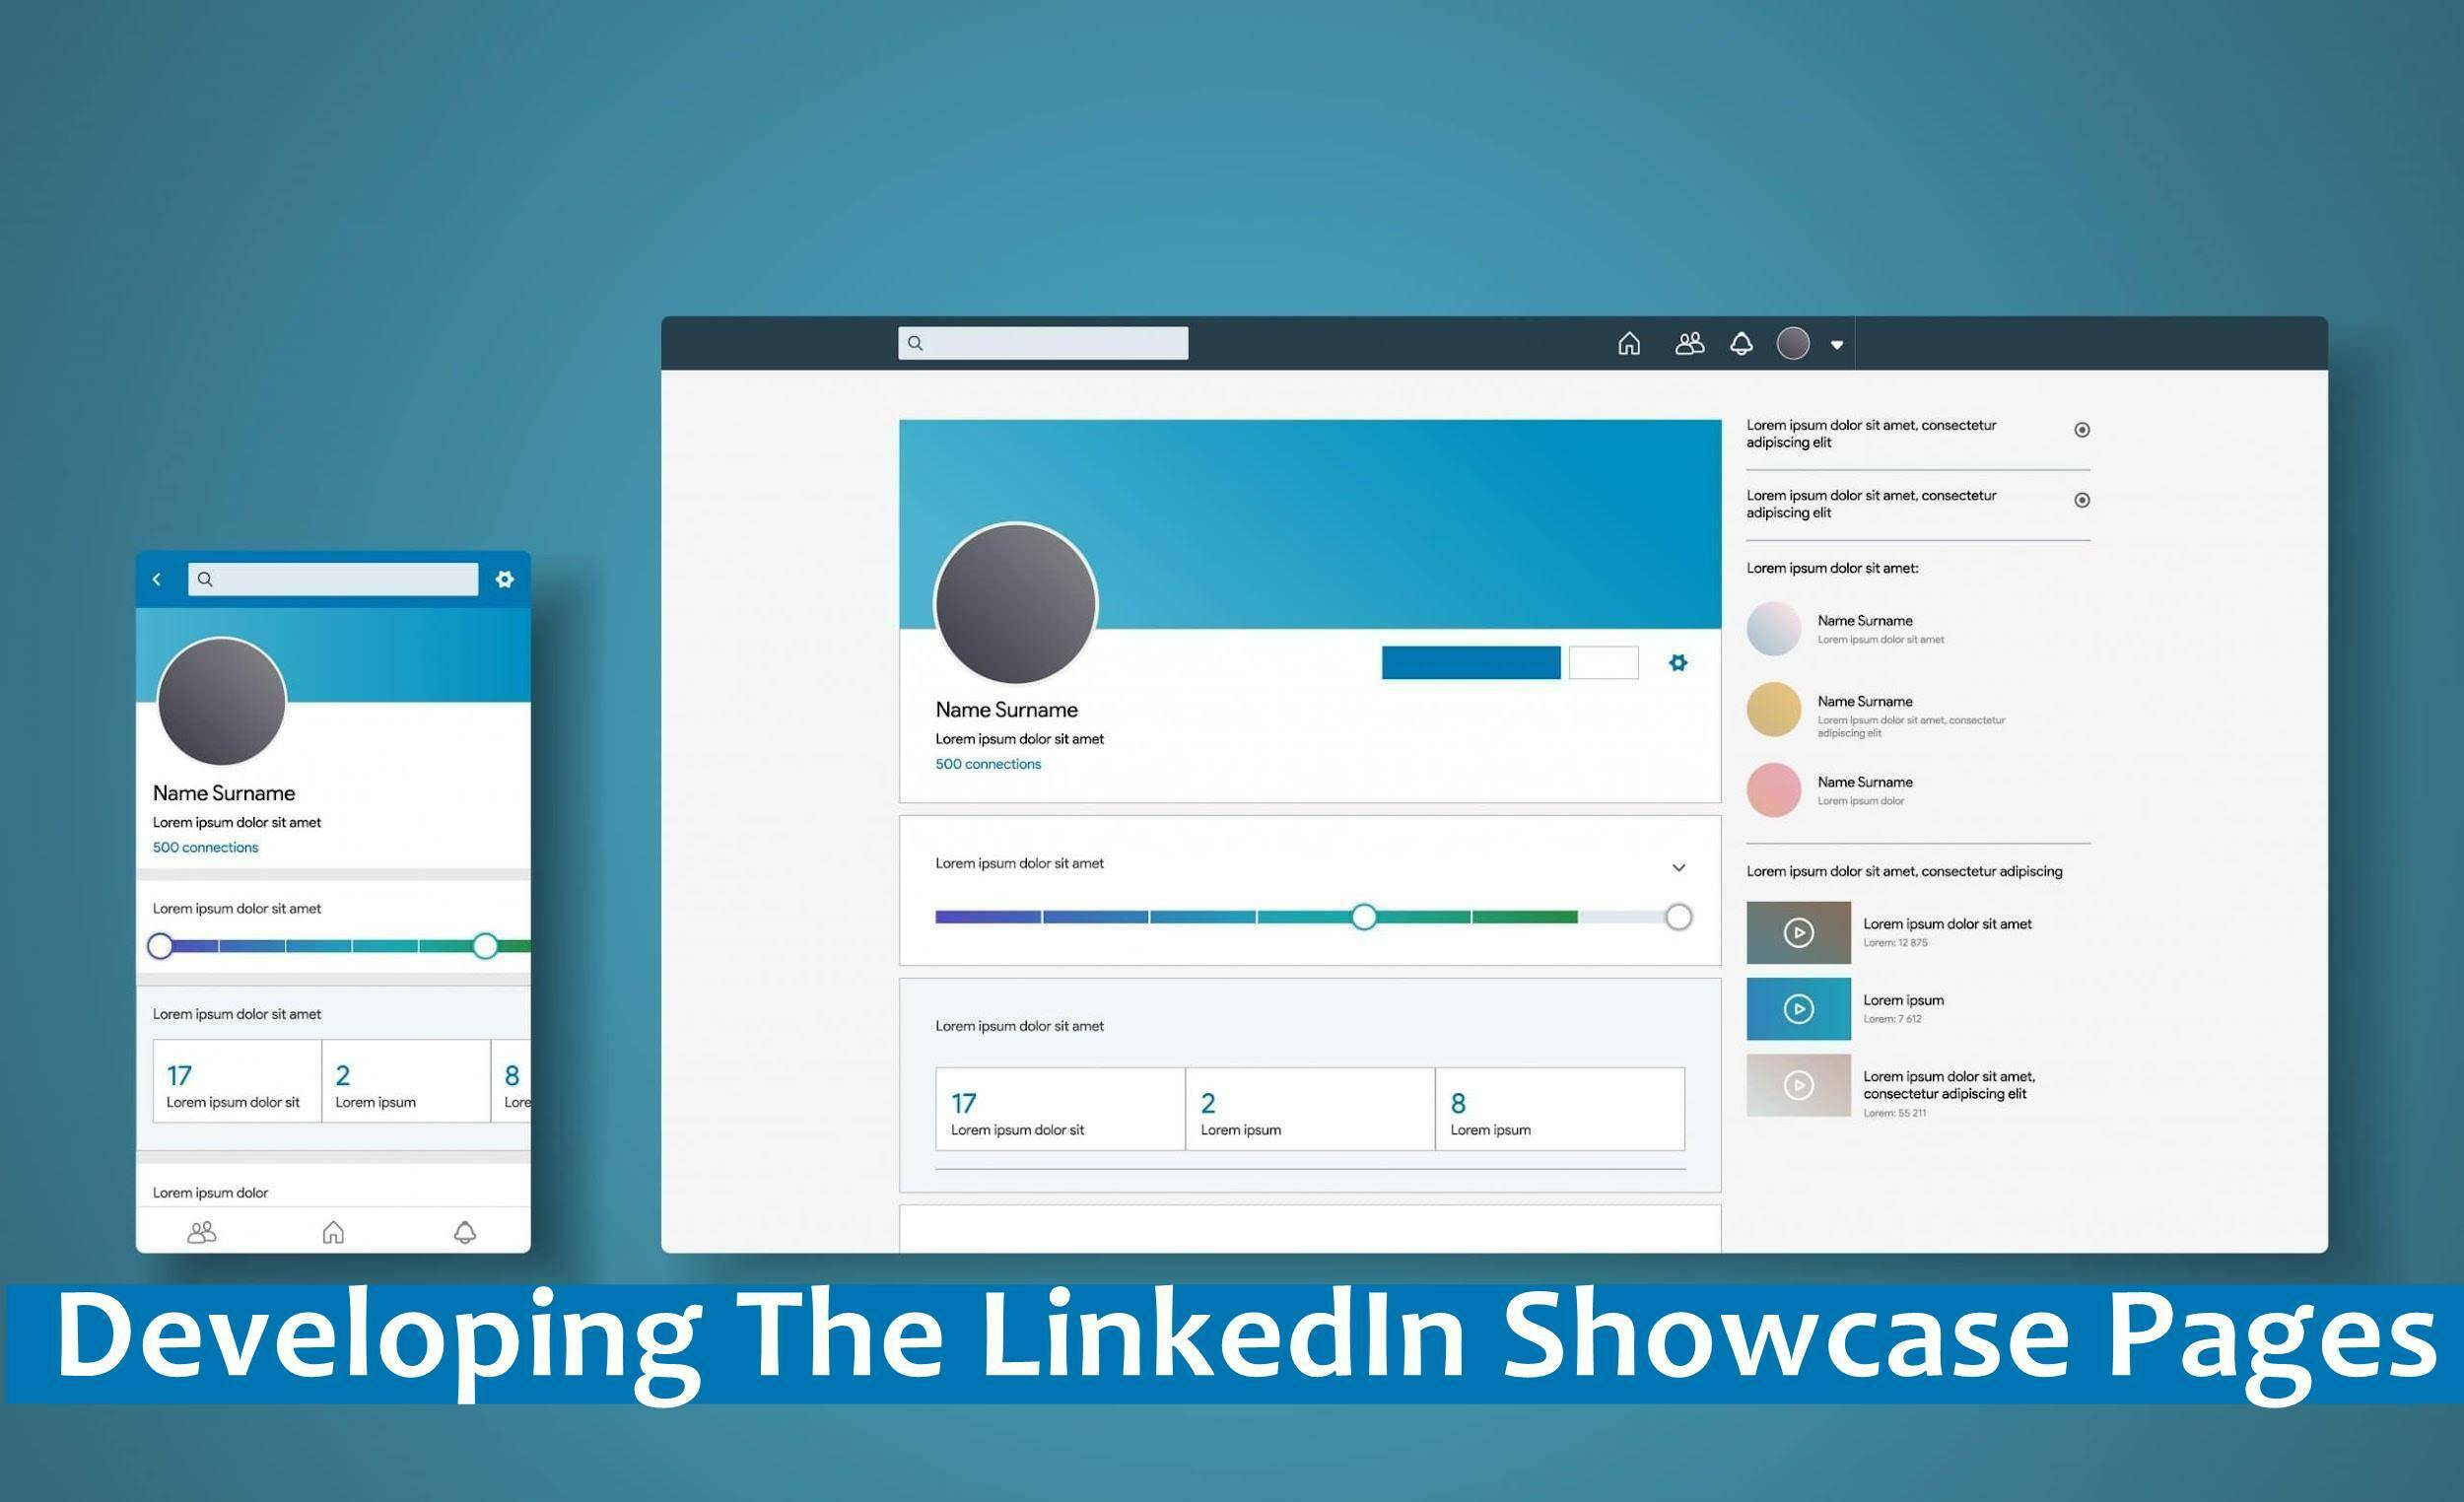 Developing The LinkedIn Showcase Pages